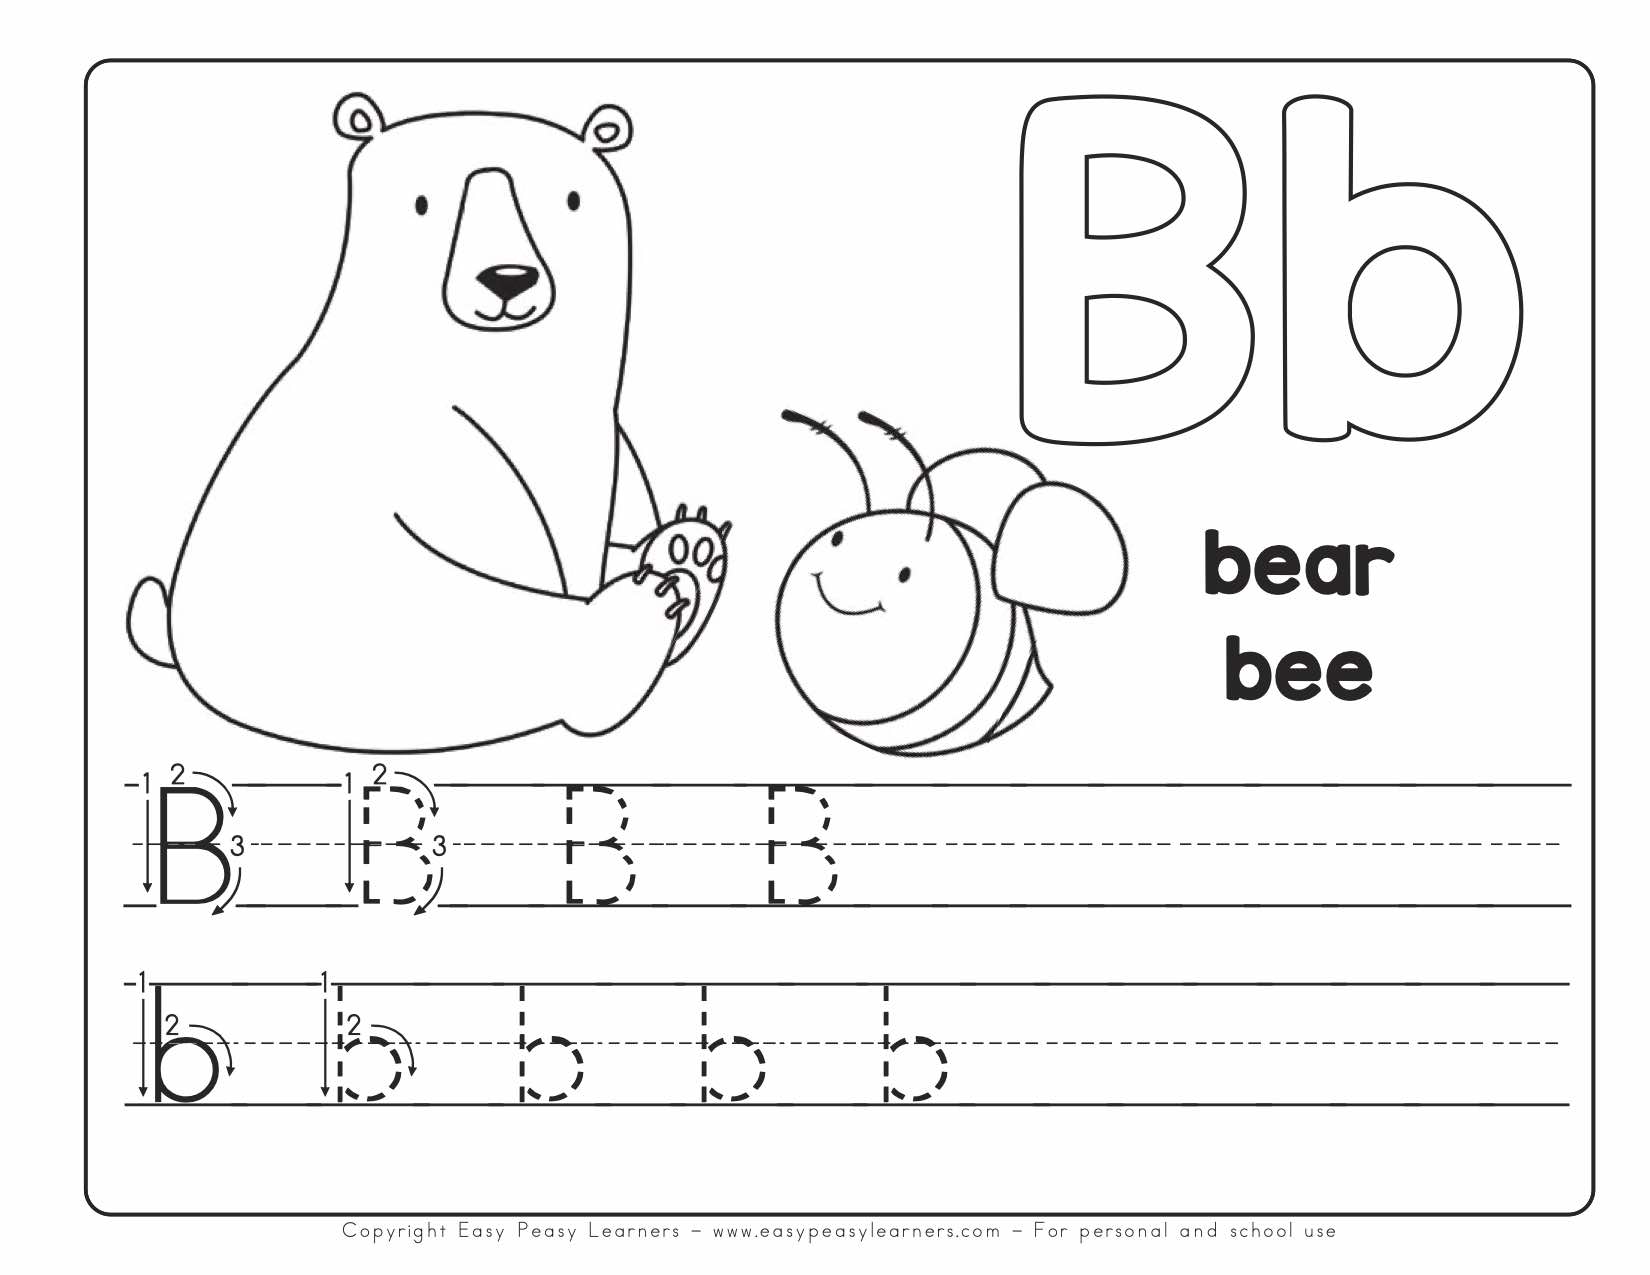 Free Printable Alphabet Book Alphabet Worksheets For Pre K And K Easy Peasy Learners